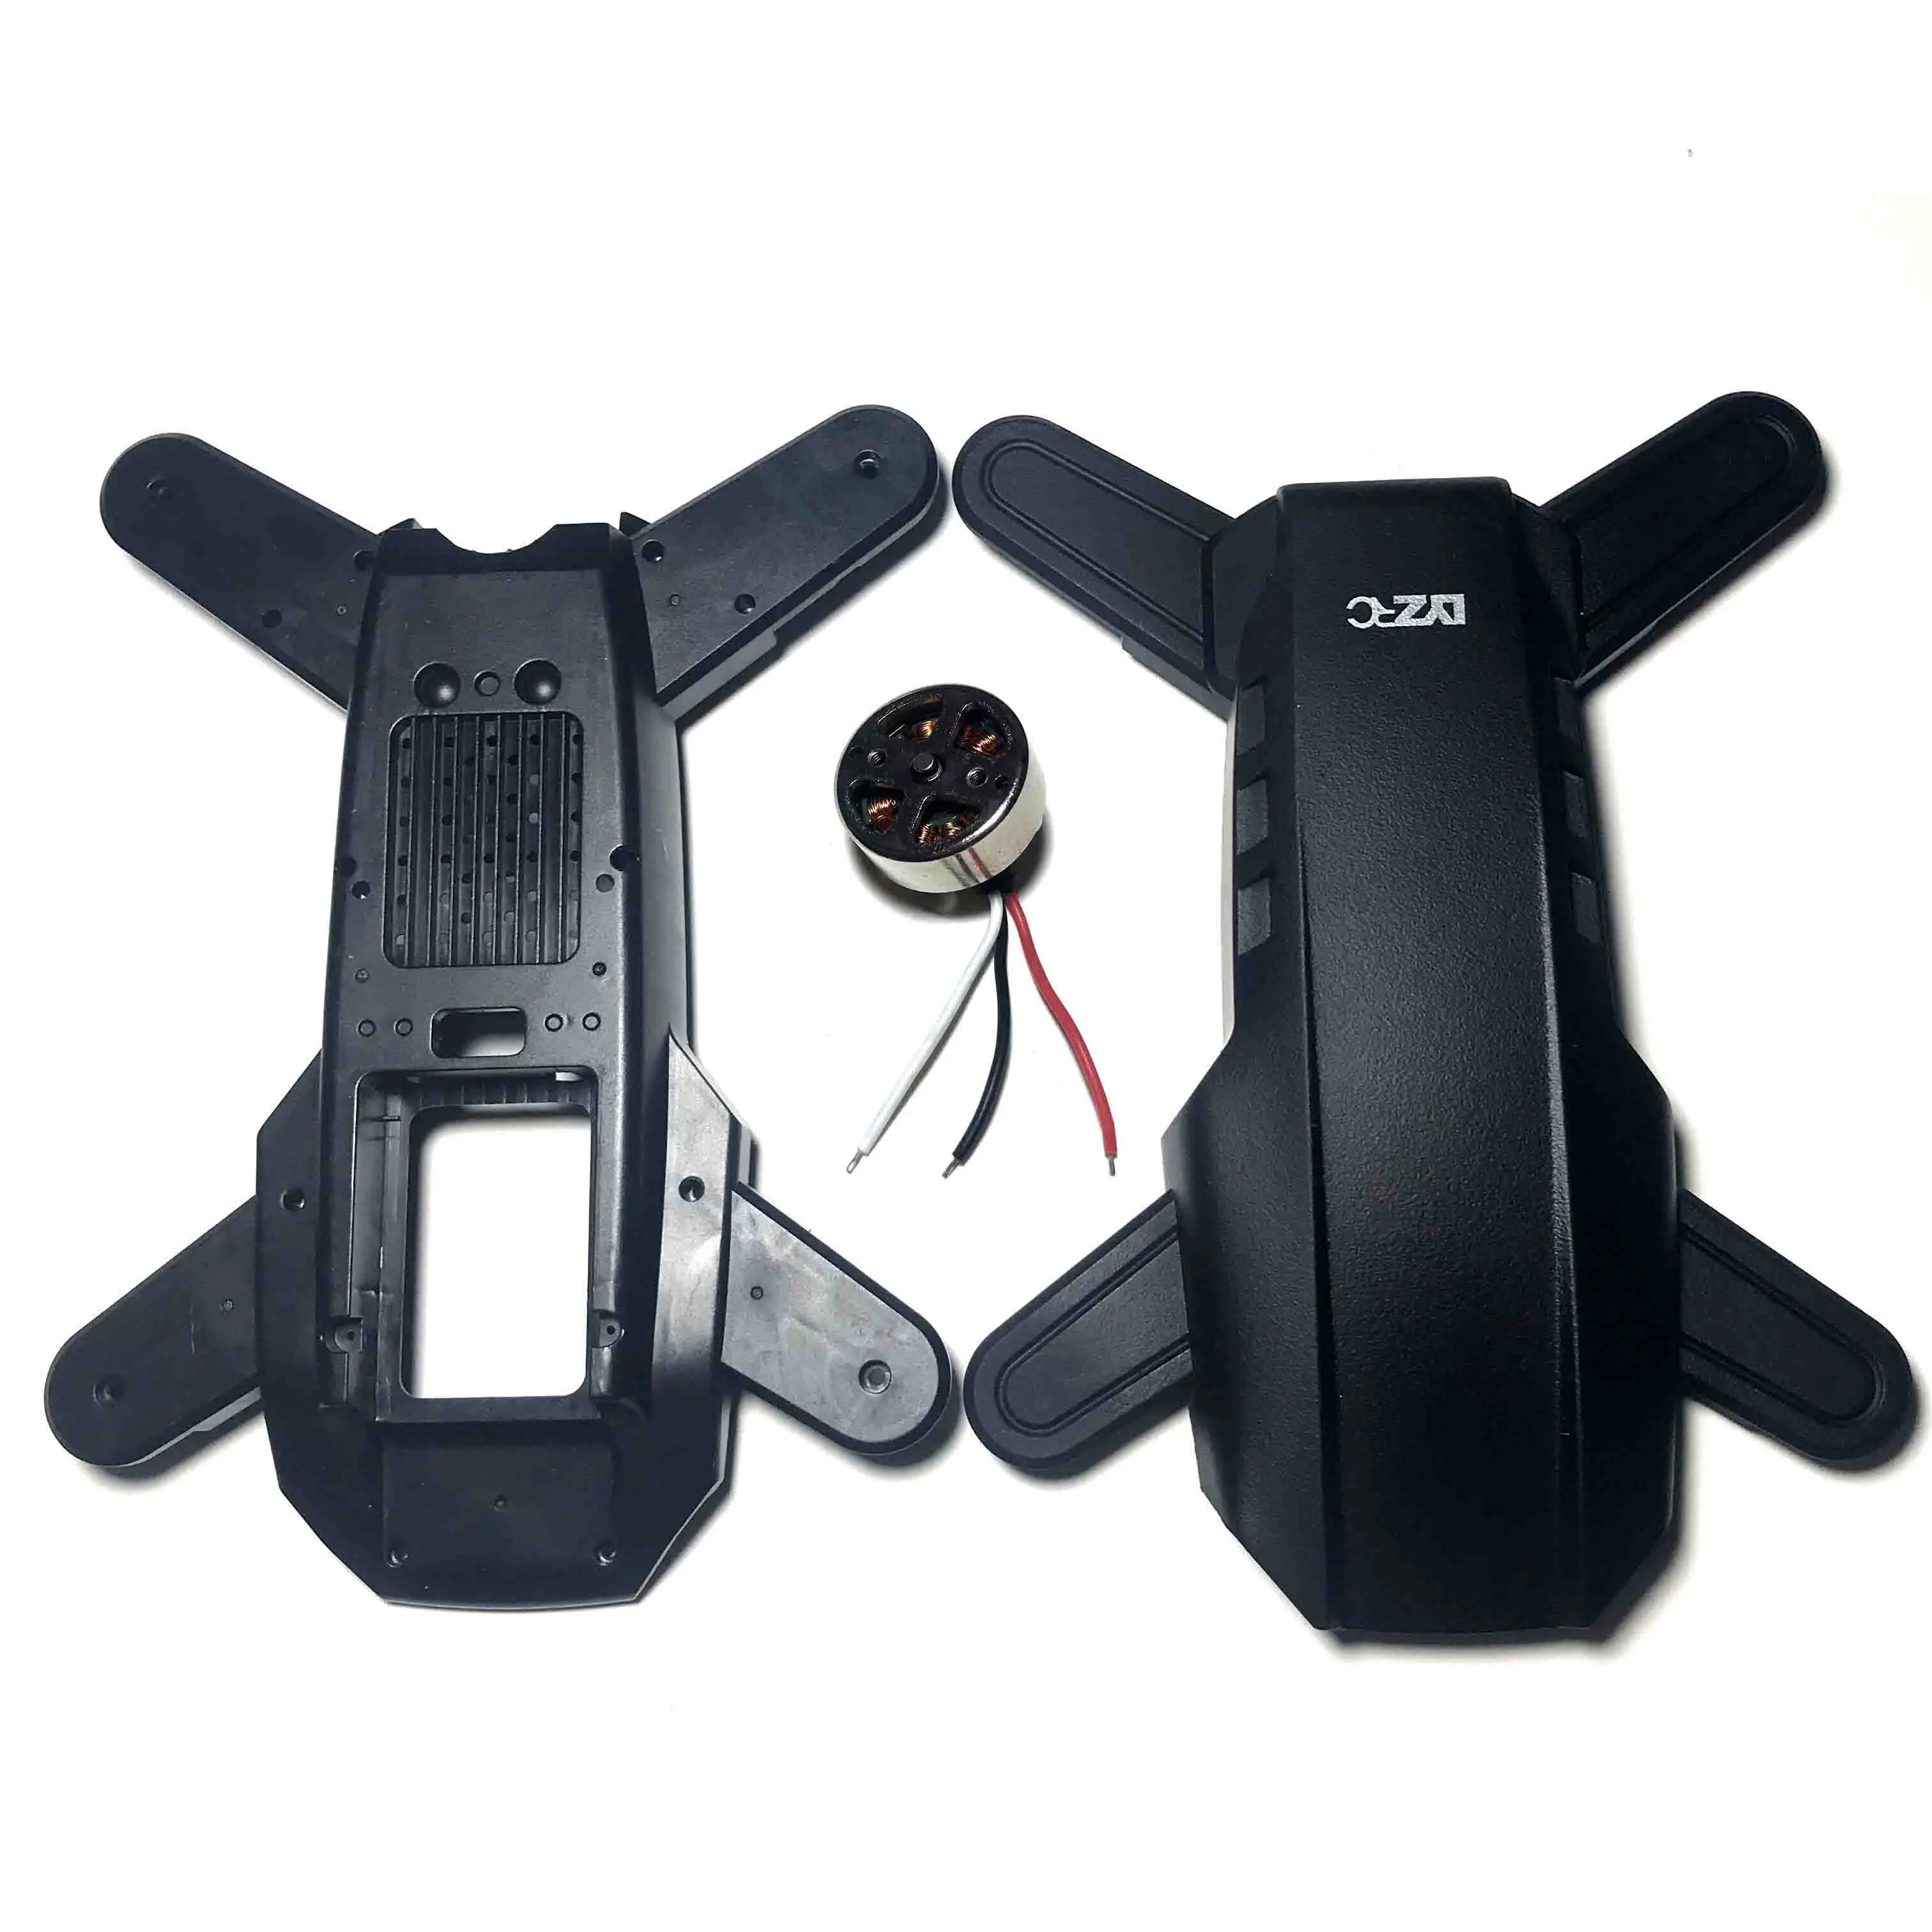 00 pro se rc drone l900pro se quadcopter body shell brushless motor engines spare parts thumb200